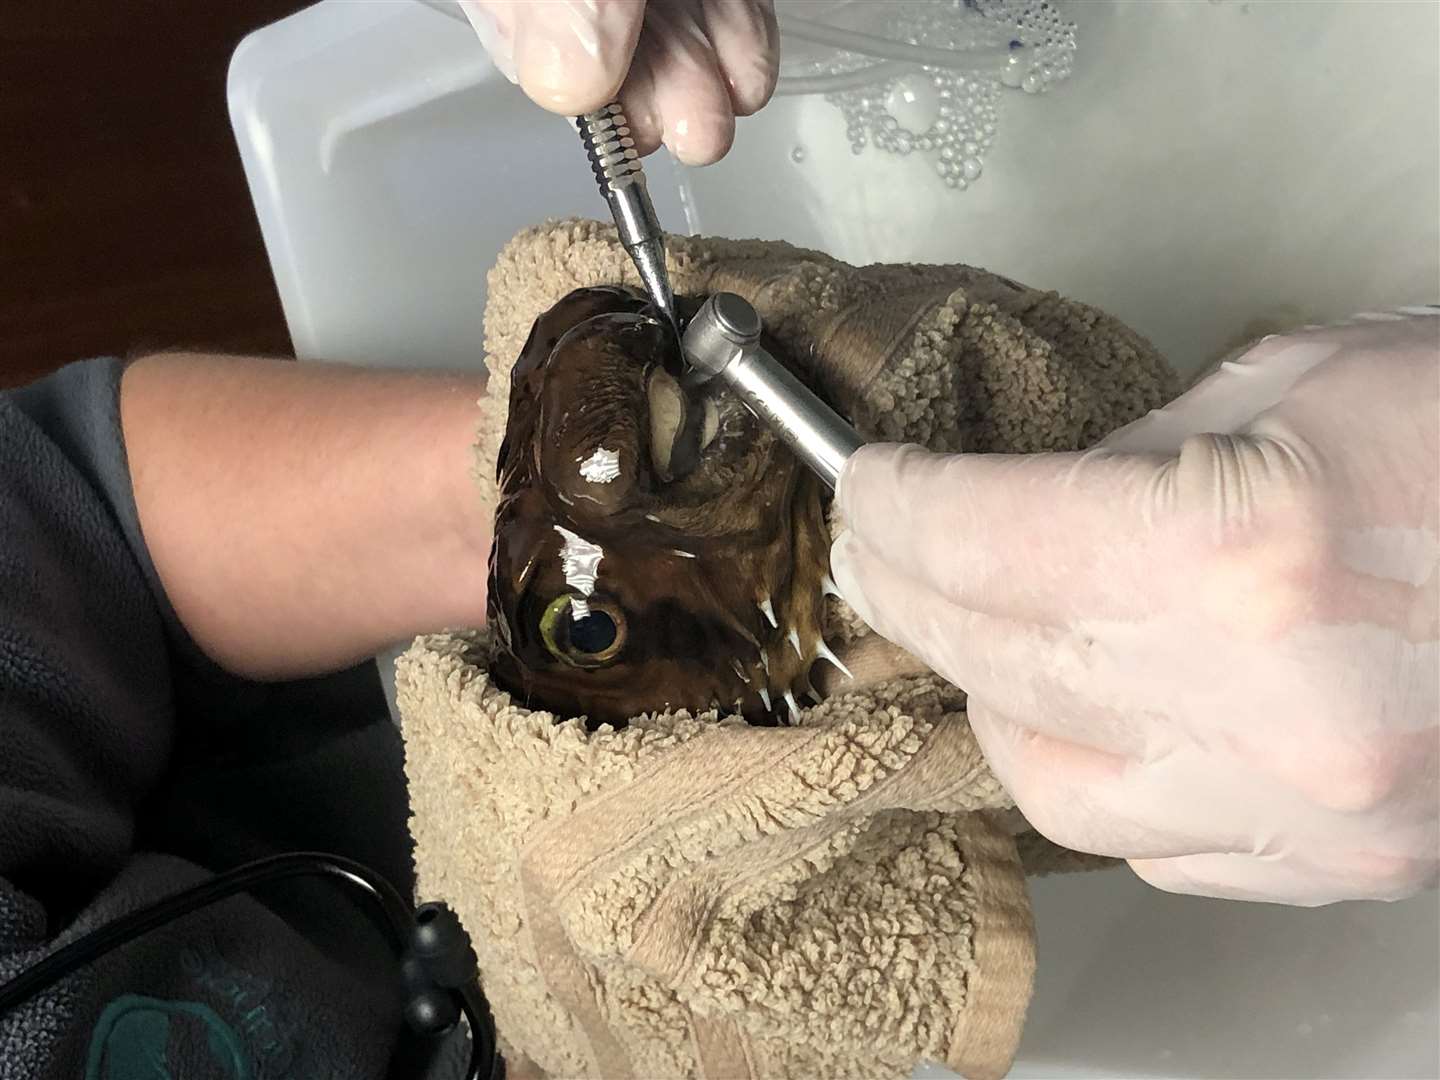 Goldie was held in a damp towel to allow the dentist to work quickly. Picture: Sandhole Veterinary Centre/ SWNS